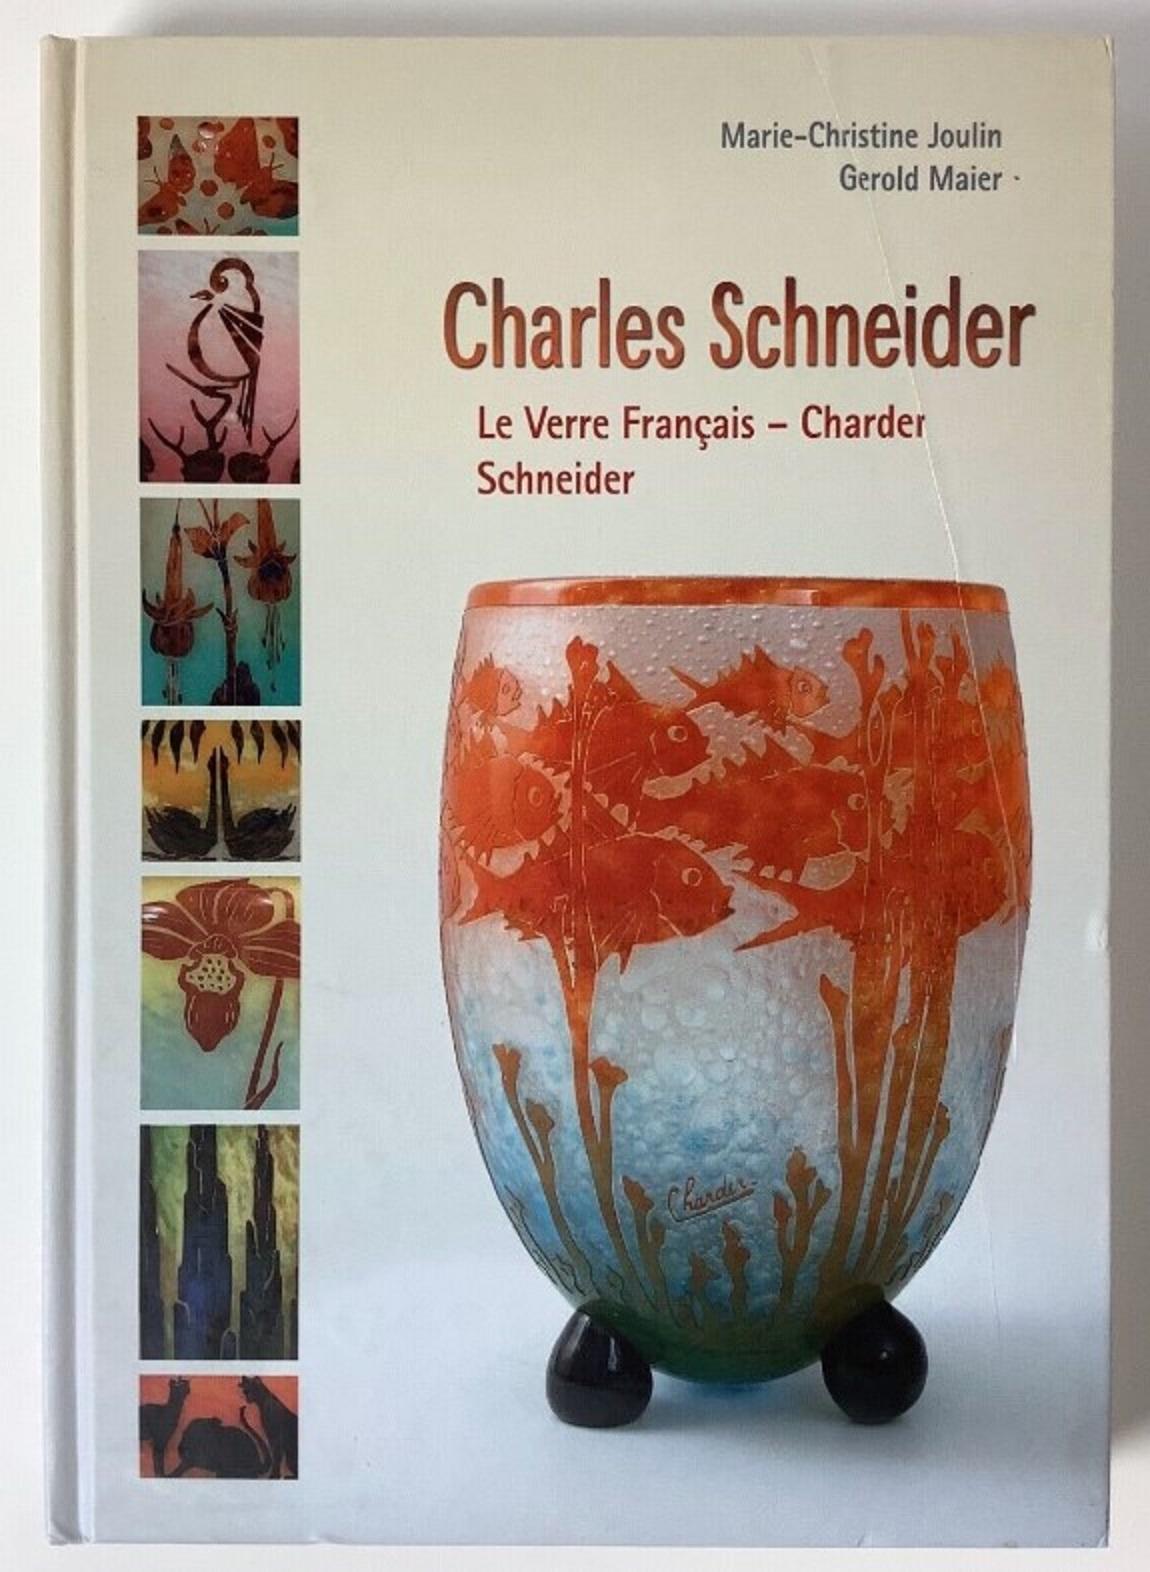 Sign: Schneider 
Schneider
Charles Schneider (1881-1953) studied art in two of most prestigious French school of the Arts. First in the School of Fine Arts in Nancy, then in the elite Ecole des Beaux Arts in Paris. While at Nancy, Charles became a